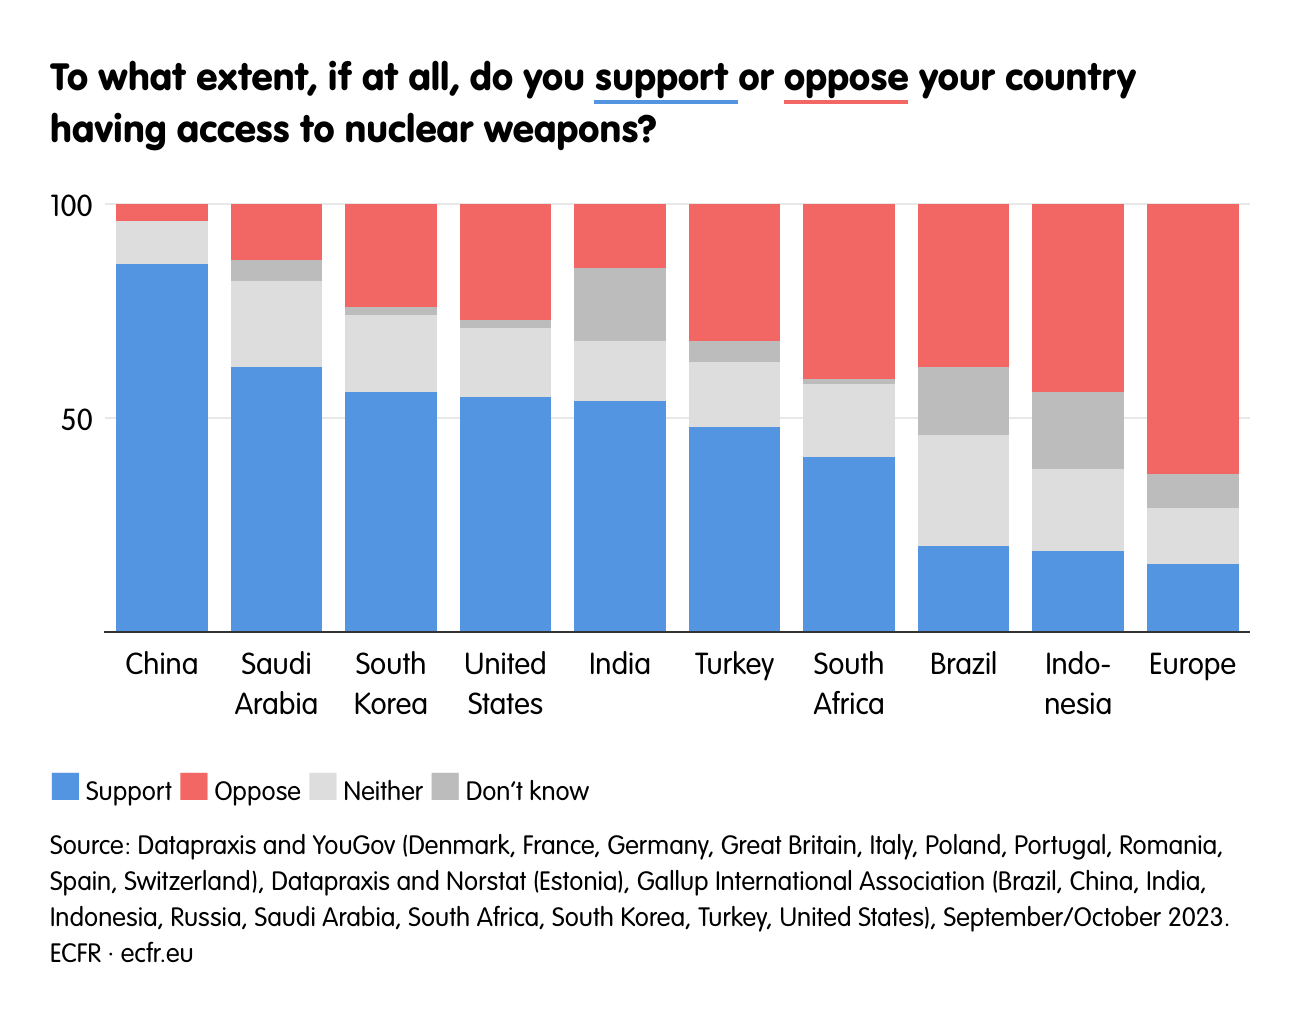 To what extent, if at all, do you support  or oppose your country having access to nuclear weapons?